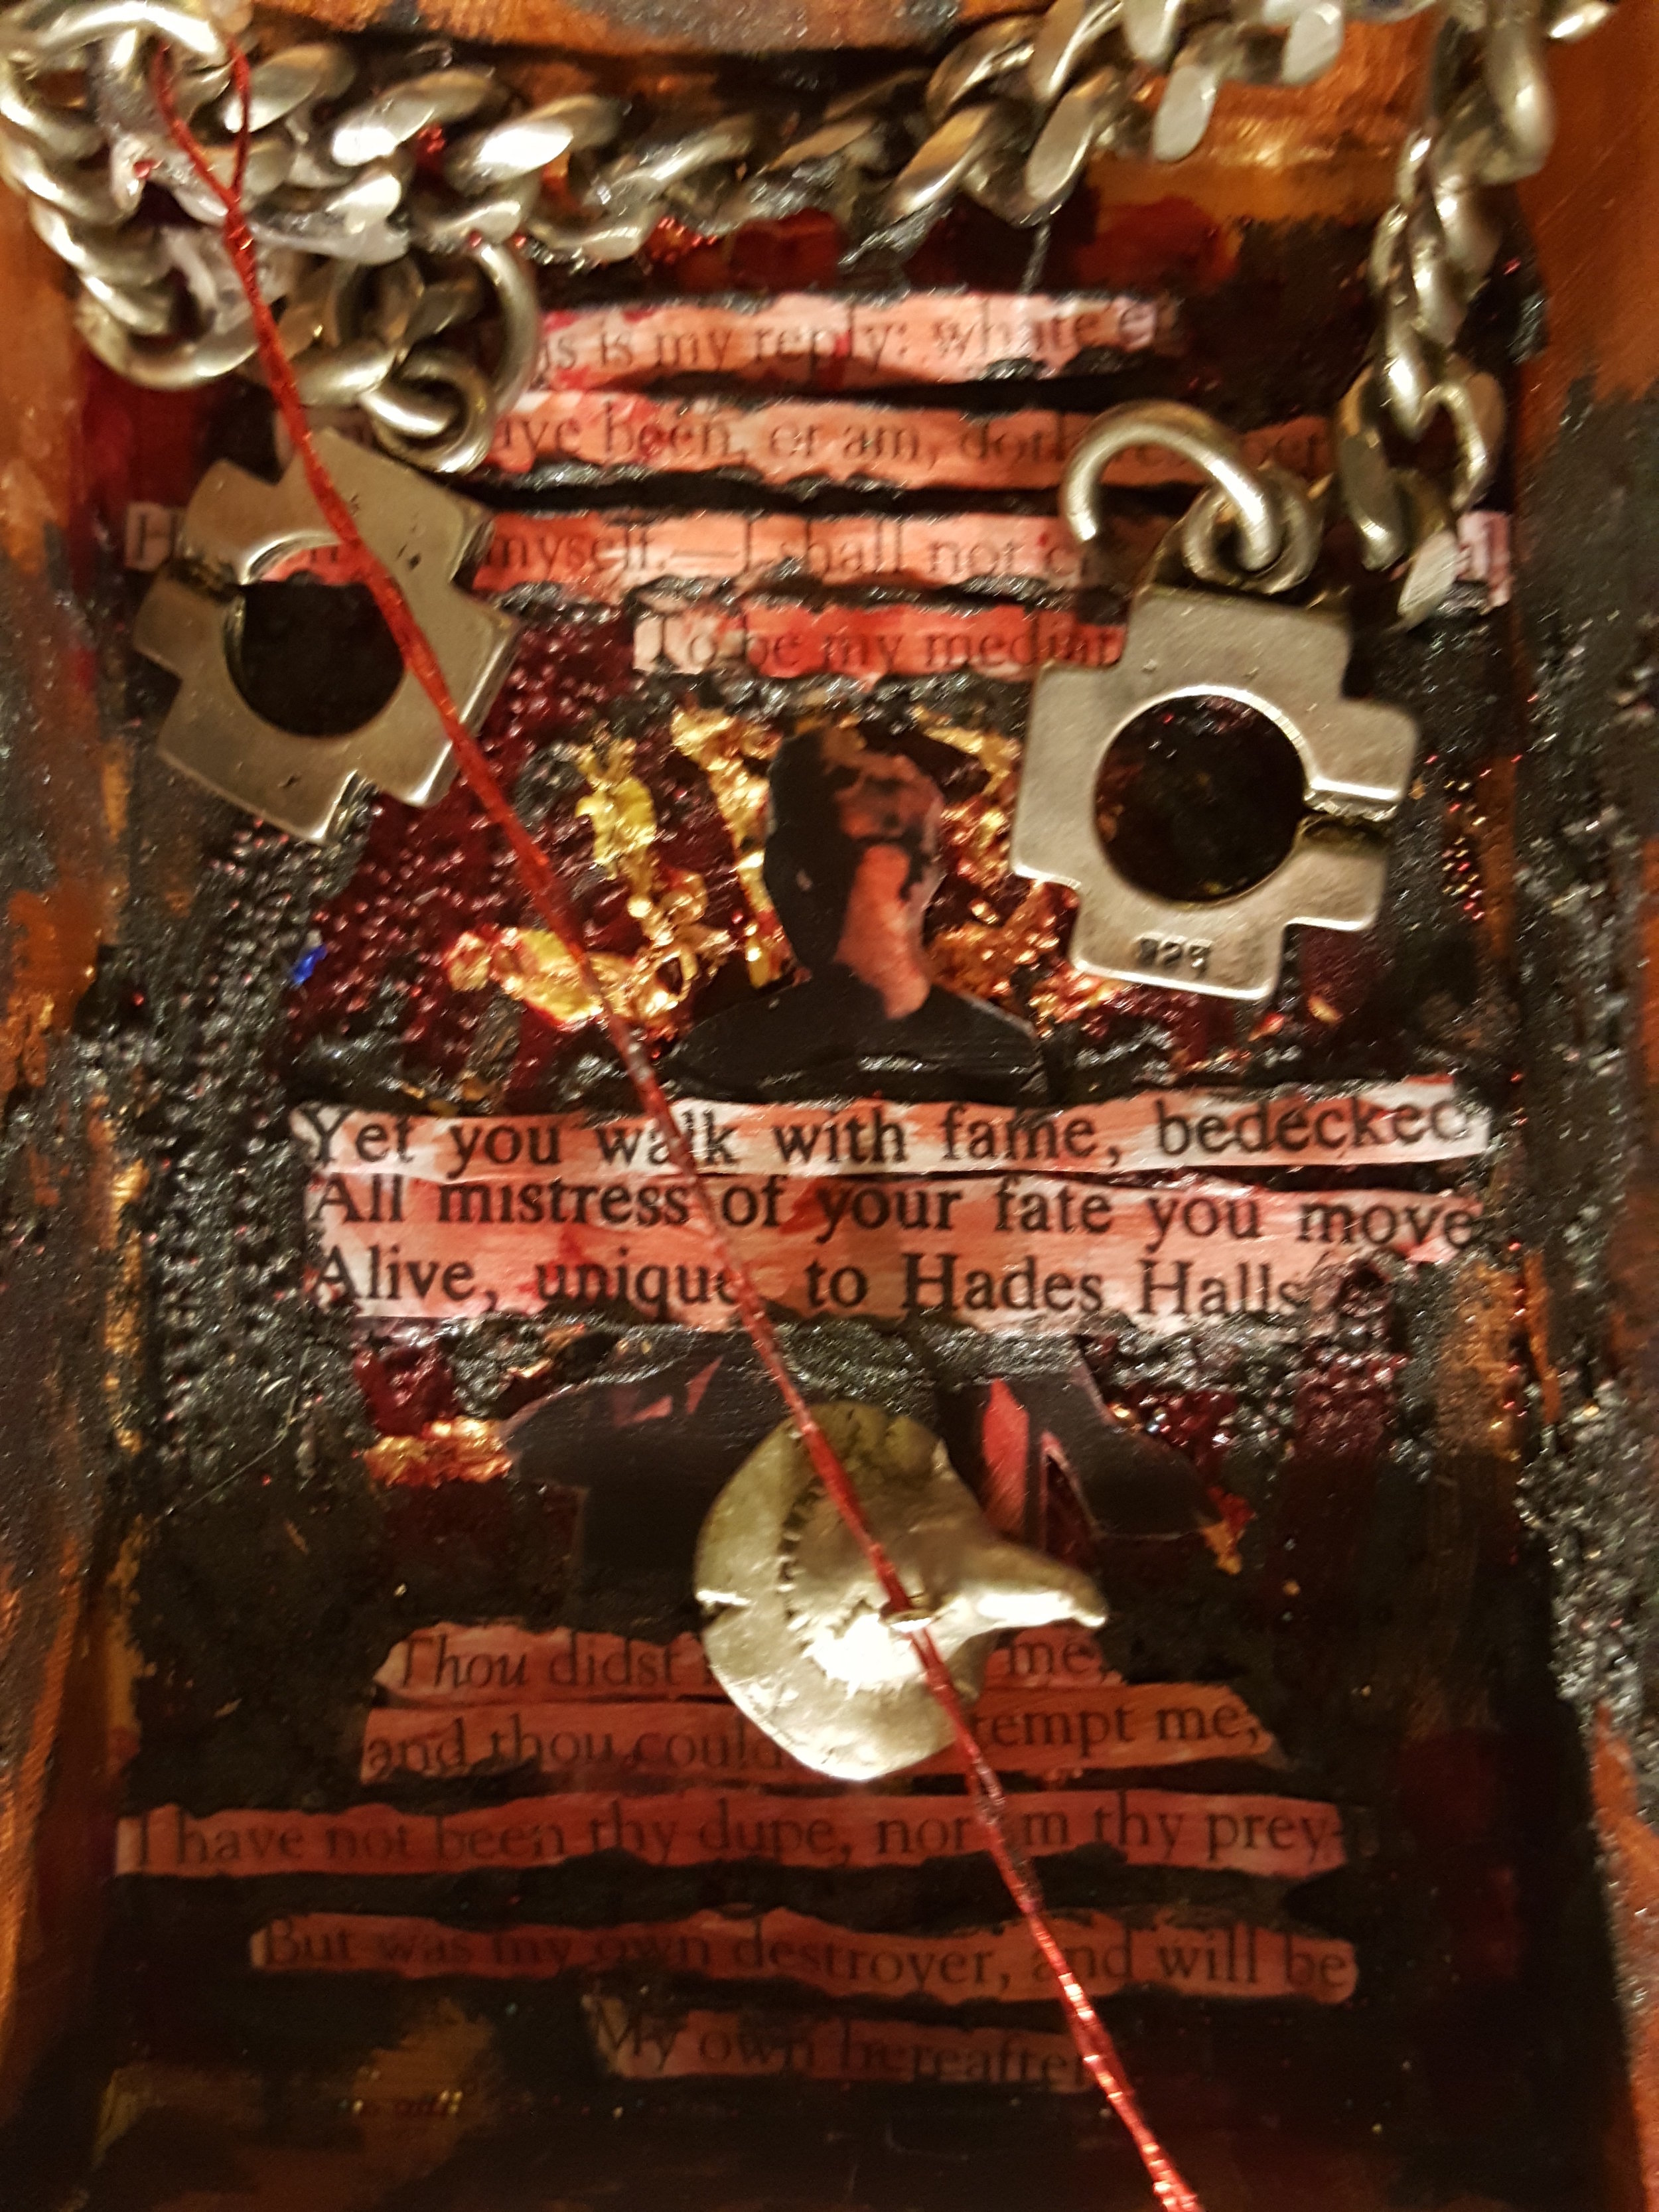  The first and most troubling box to make, representing how Sharon endured a backlash designed to make her confess to sins she hadn’t committed. I was very inspired by how she agreed to keep learning compassionate sensitivity while remaining true to 